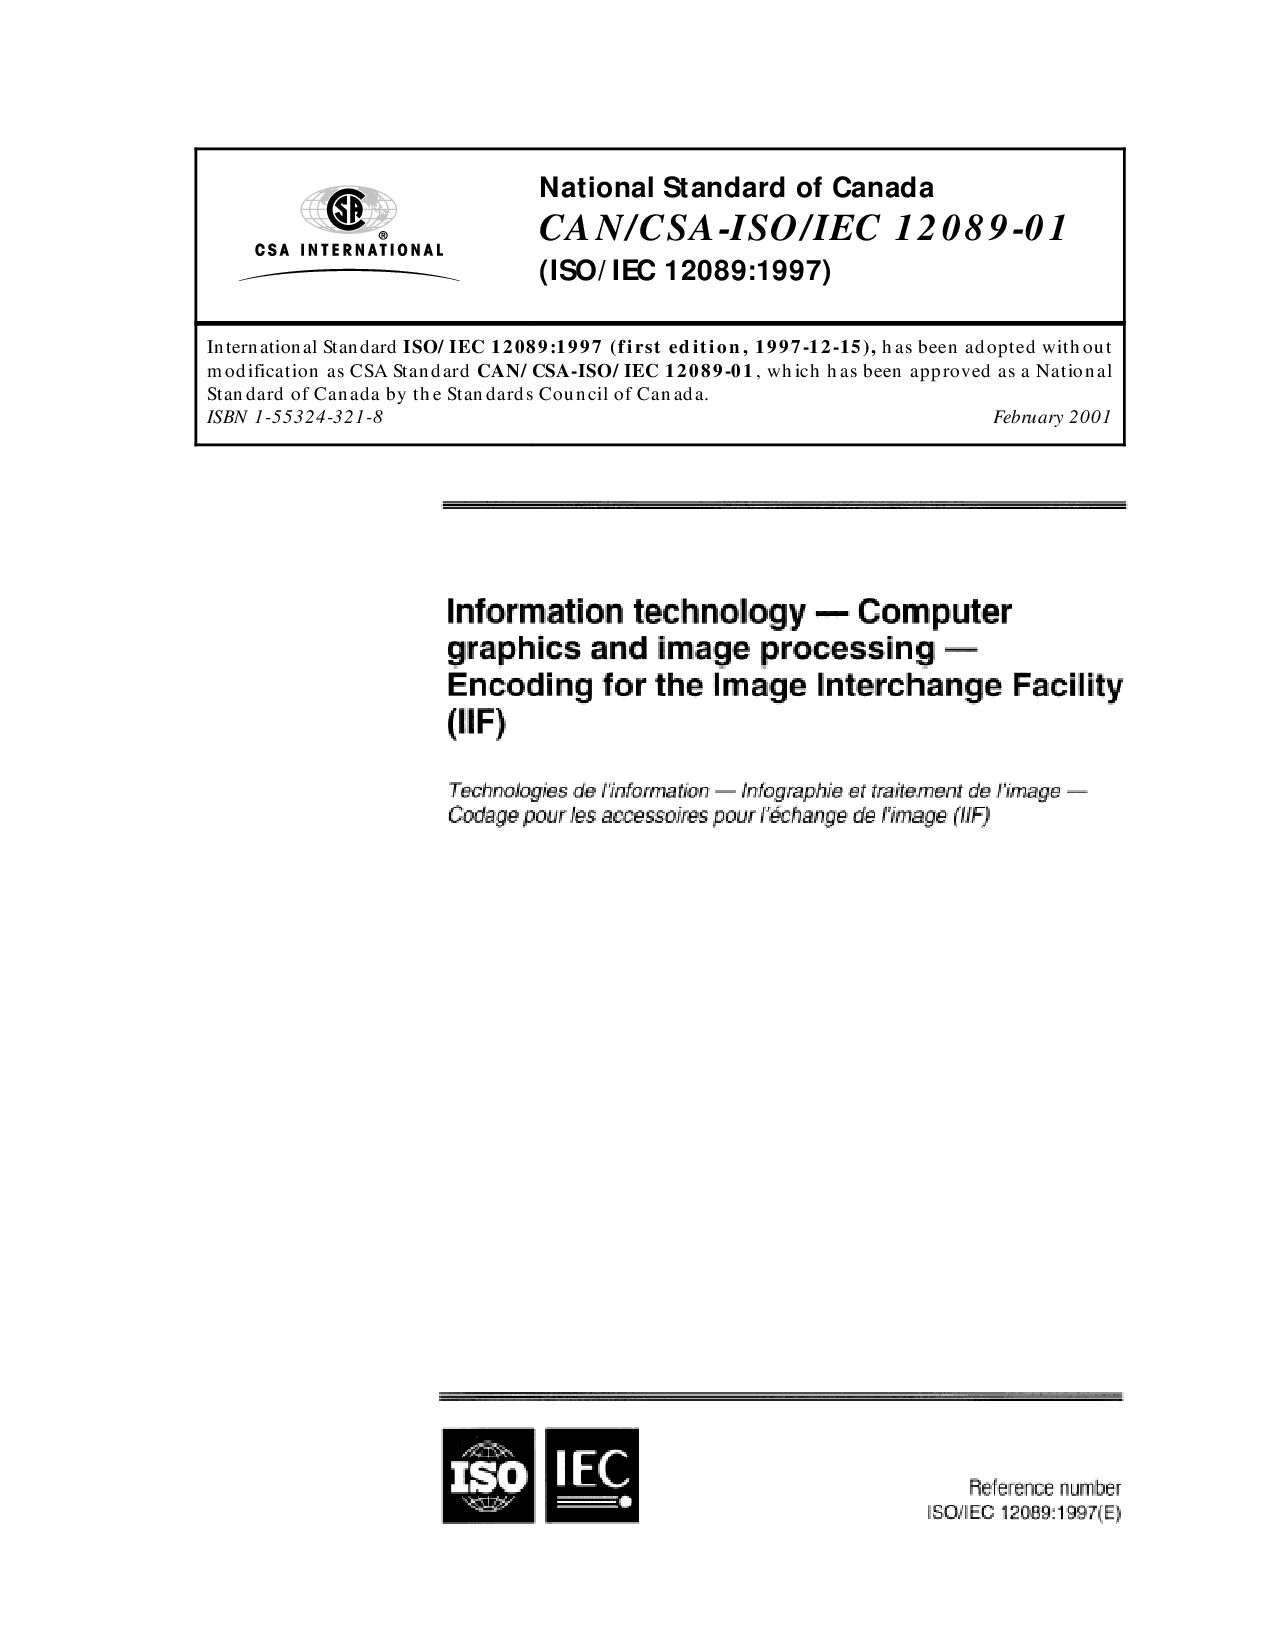 CAN/CSA-ISO/IEC 12089:2001